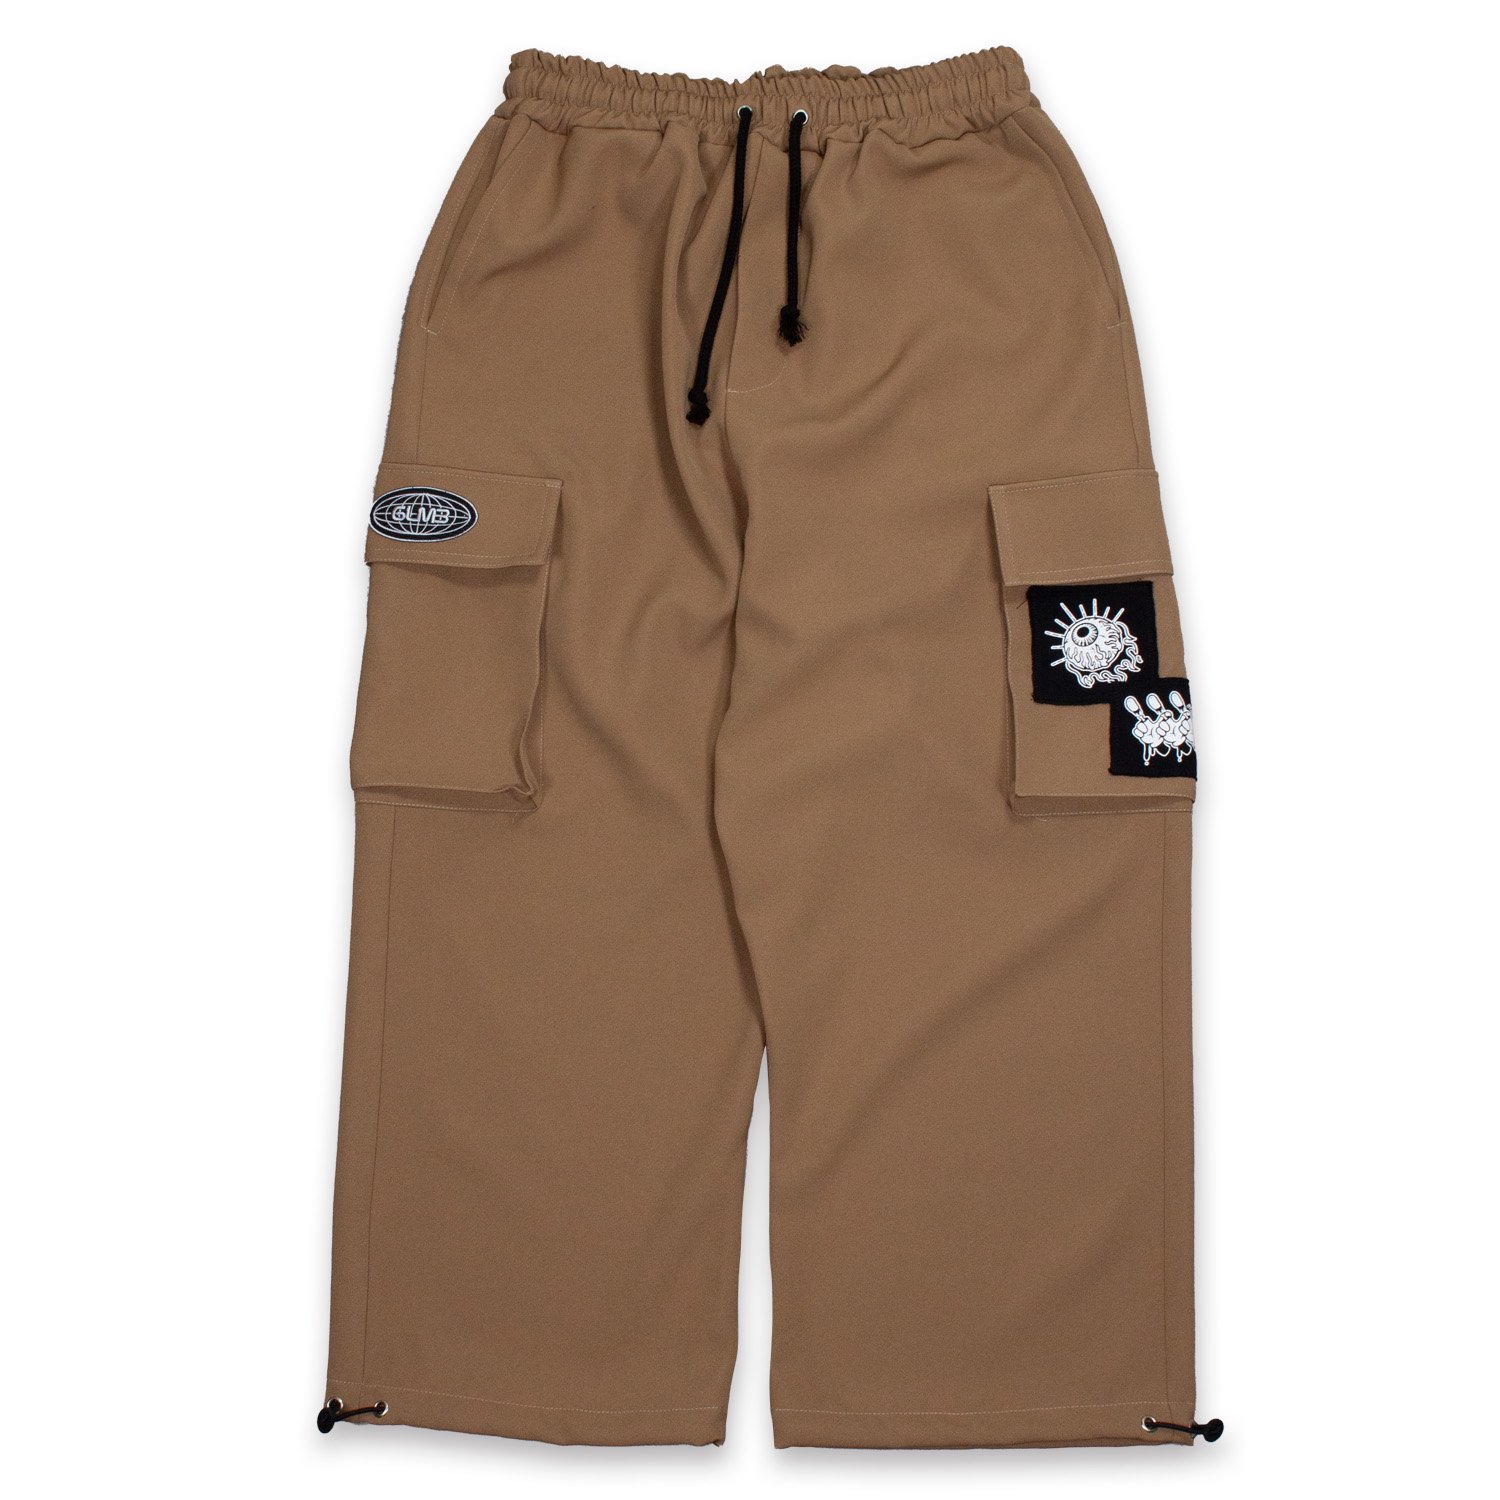 <img class='new_mark_img1' src='https://img.shop-pro.jp/img/new/icons8.gif' style='border:none;display:inline;margin:0px;padding:0px;width:auto;' />CARGO PANTS / ֥饦